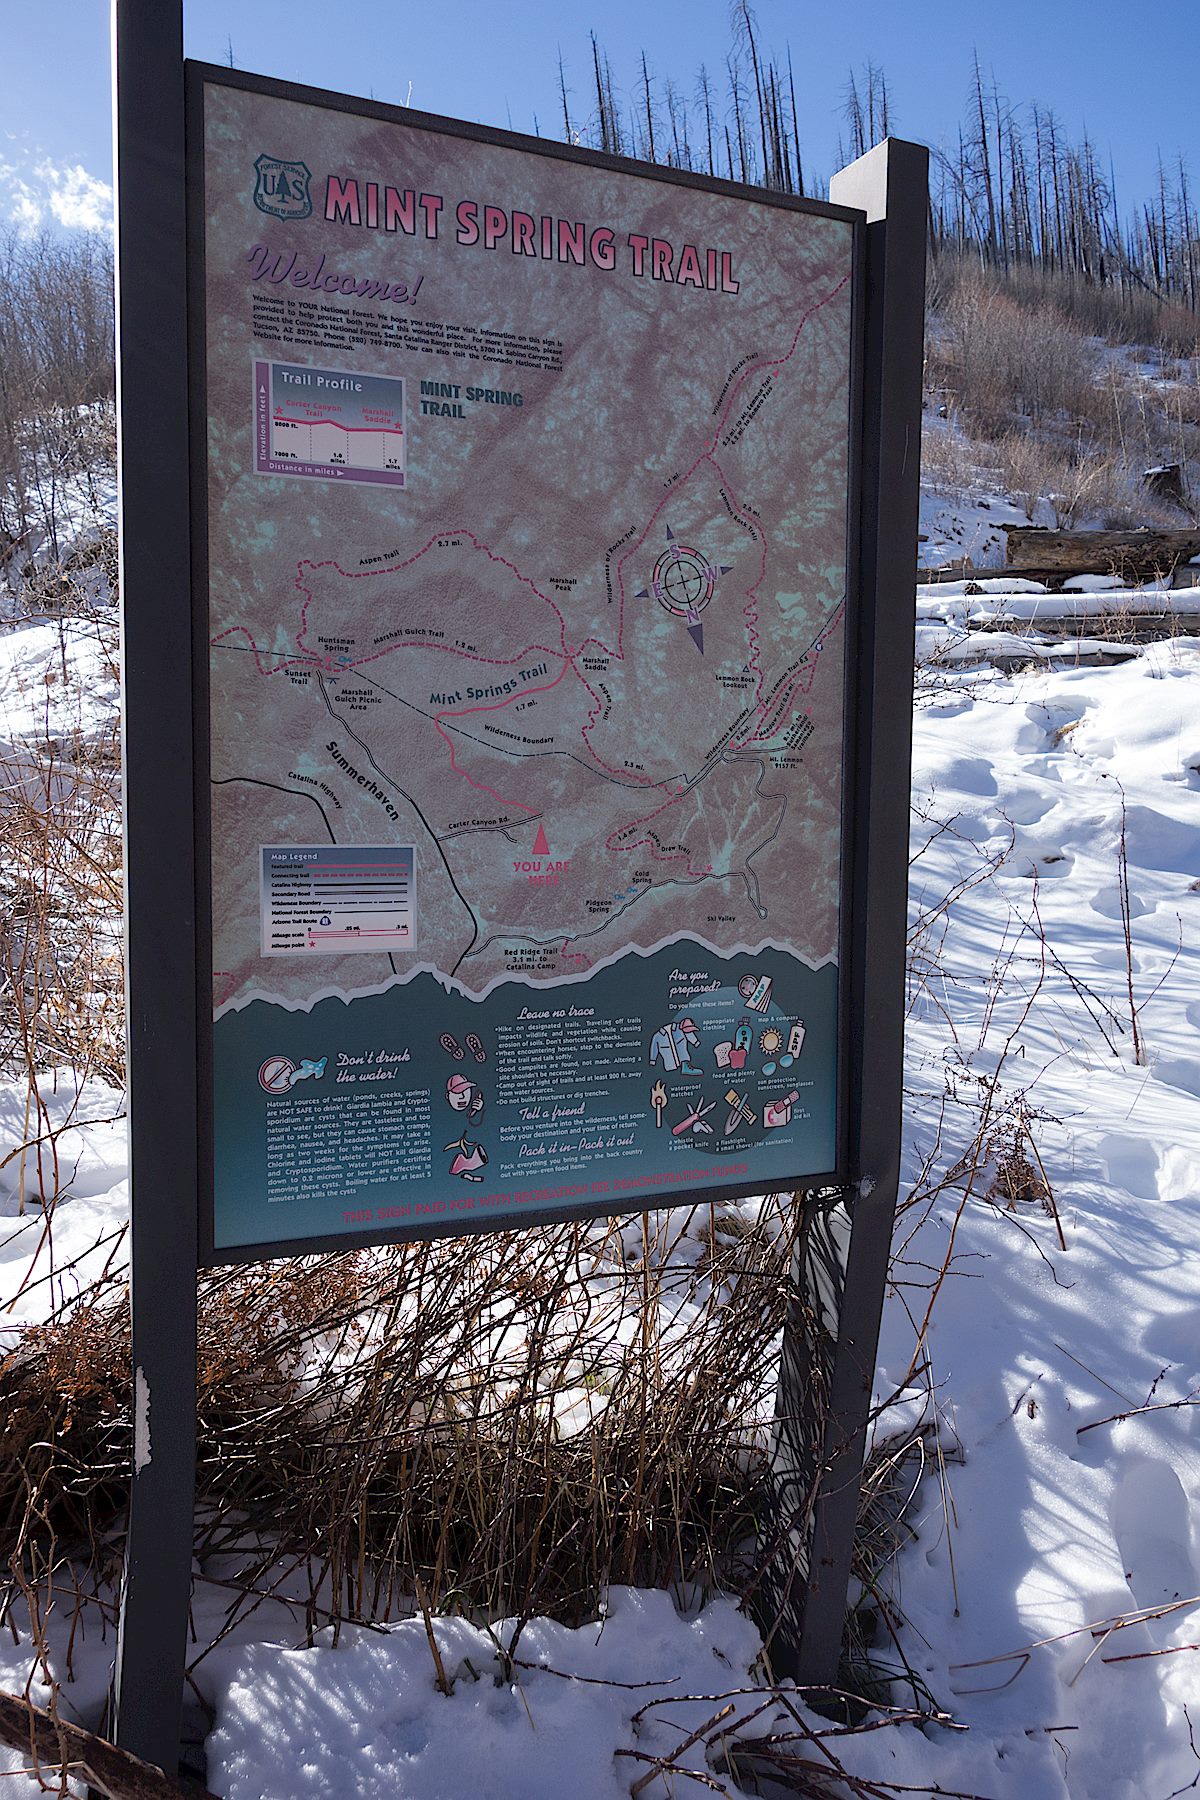 Small trail sign near the start of the trail. April 2014.